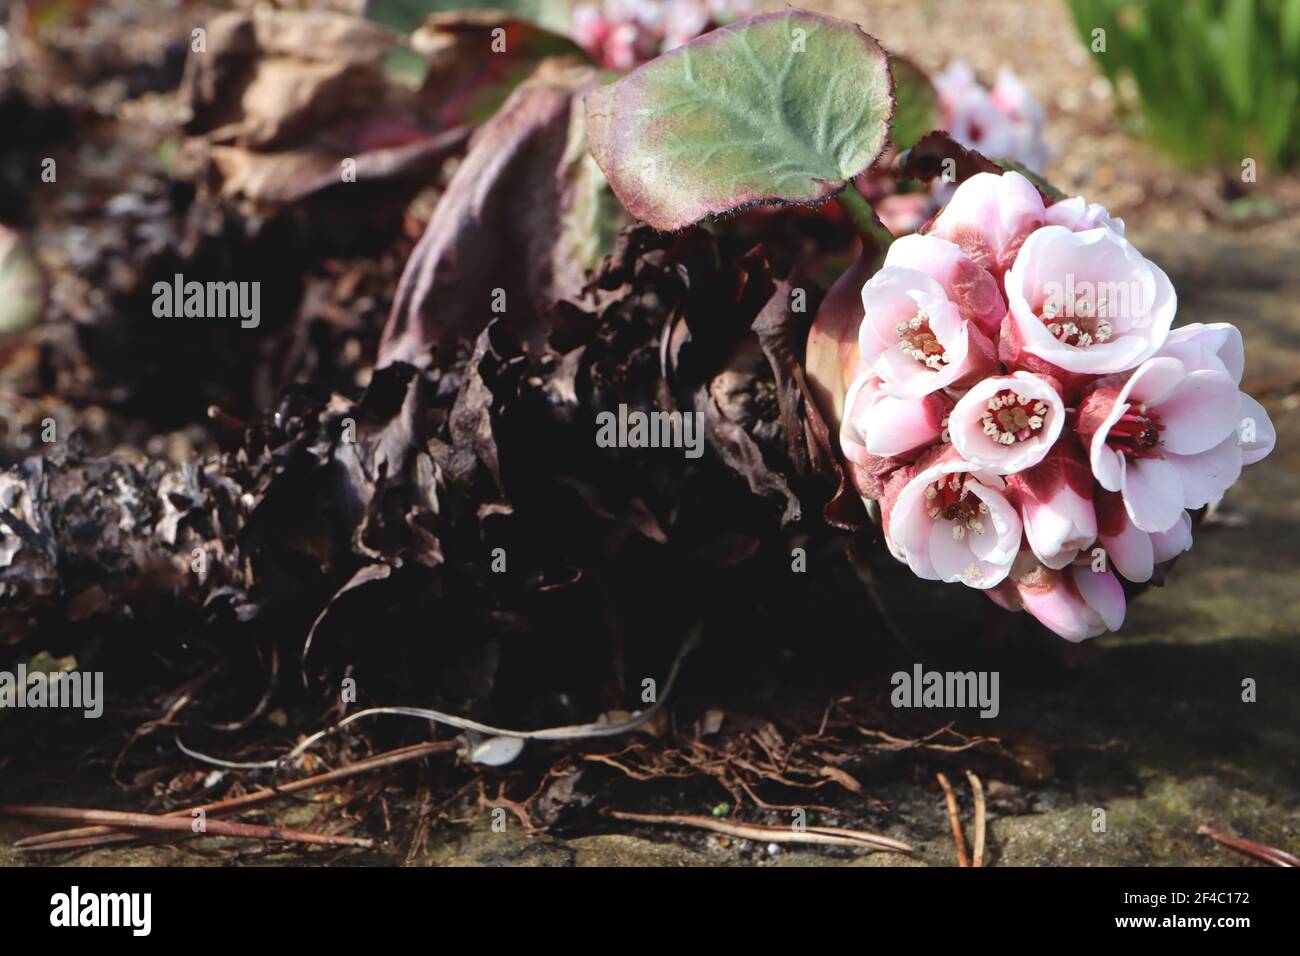 Bergenia crassifolia root or rhizome Elephant’s ears crassifolia – white flowers emerging from craggy thick brown root,  March, England, UK Stock Photo